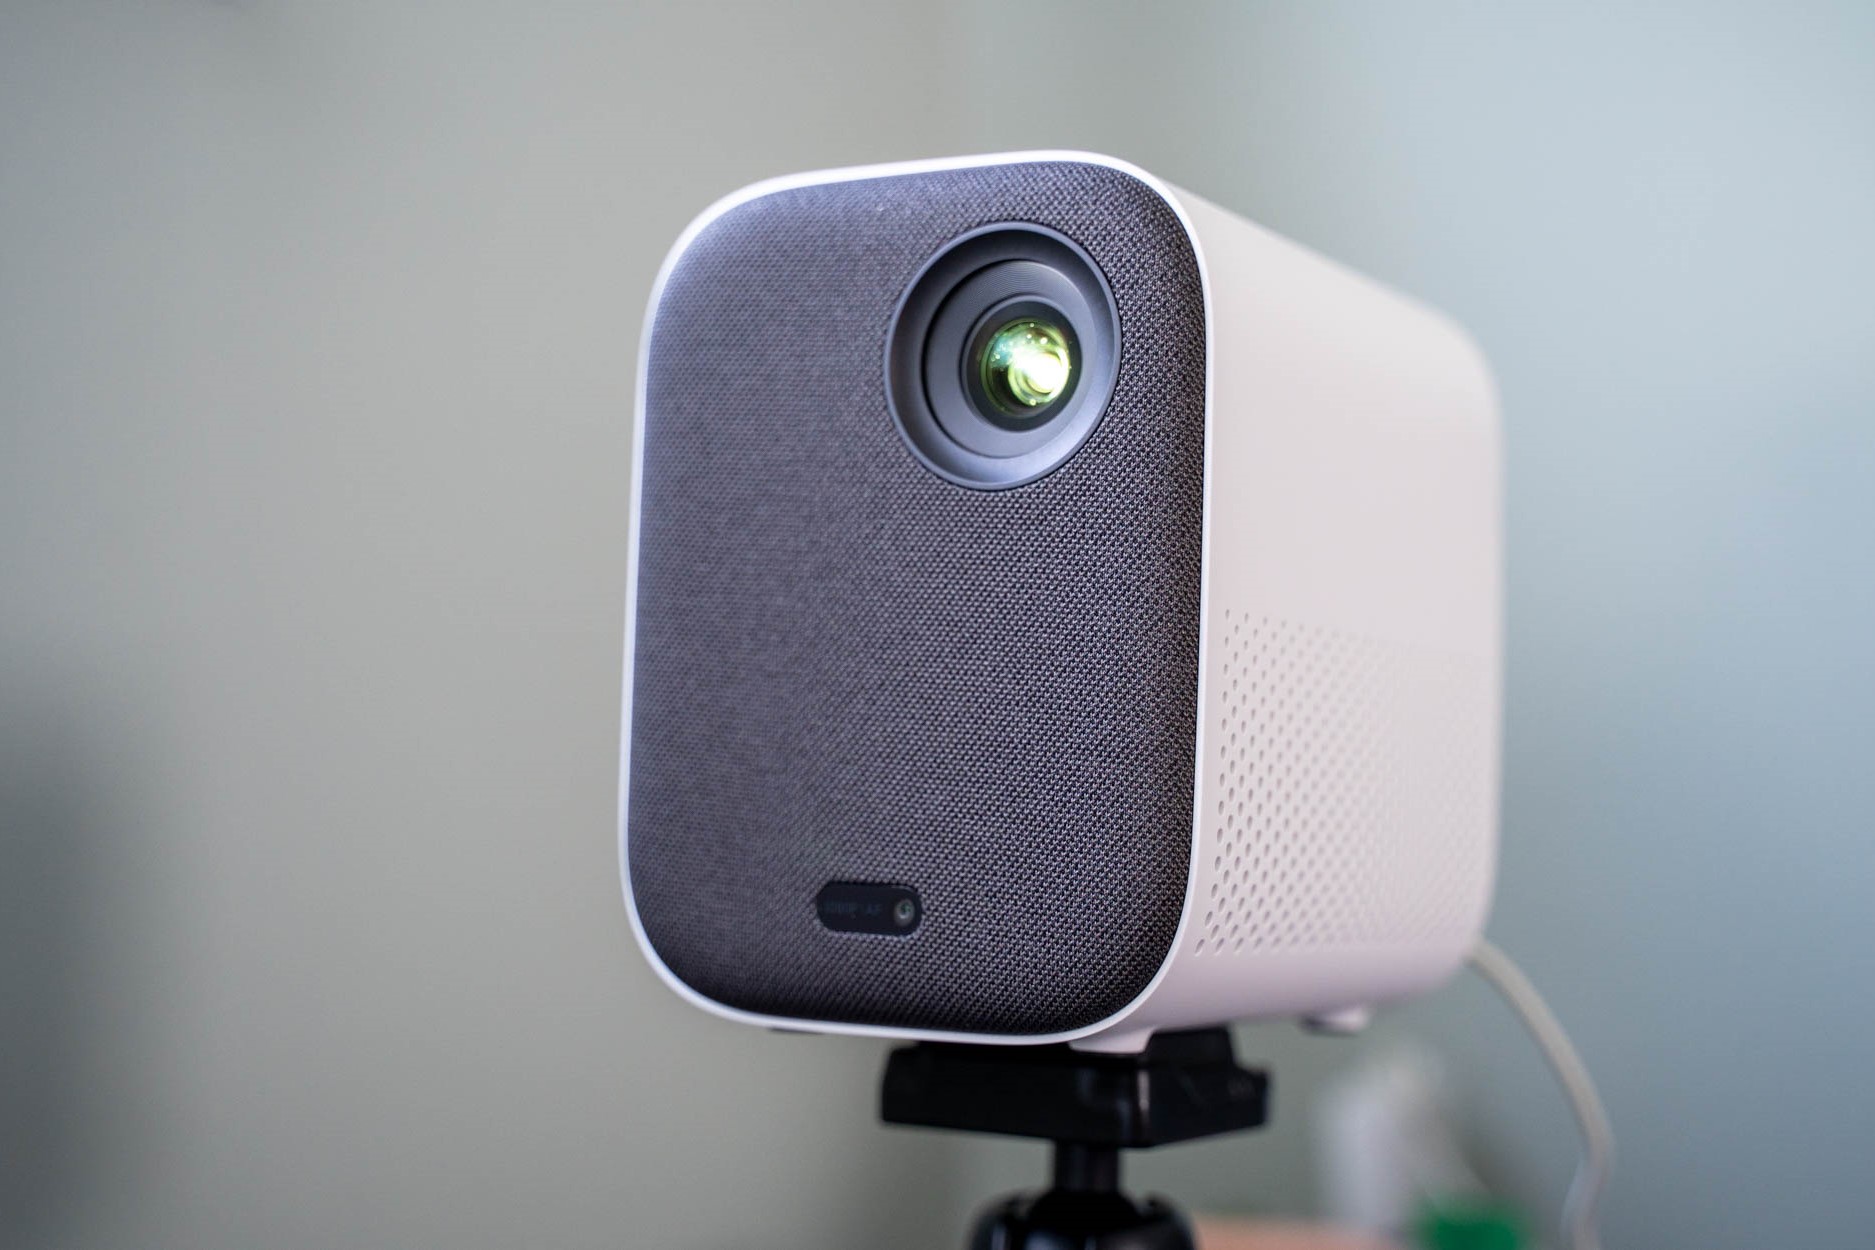 Xiaomi Projector Input Name Change: A Quick Tutorial